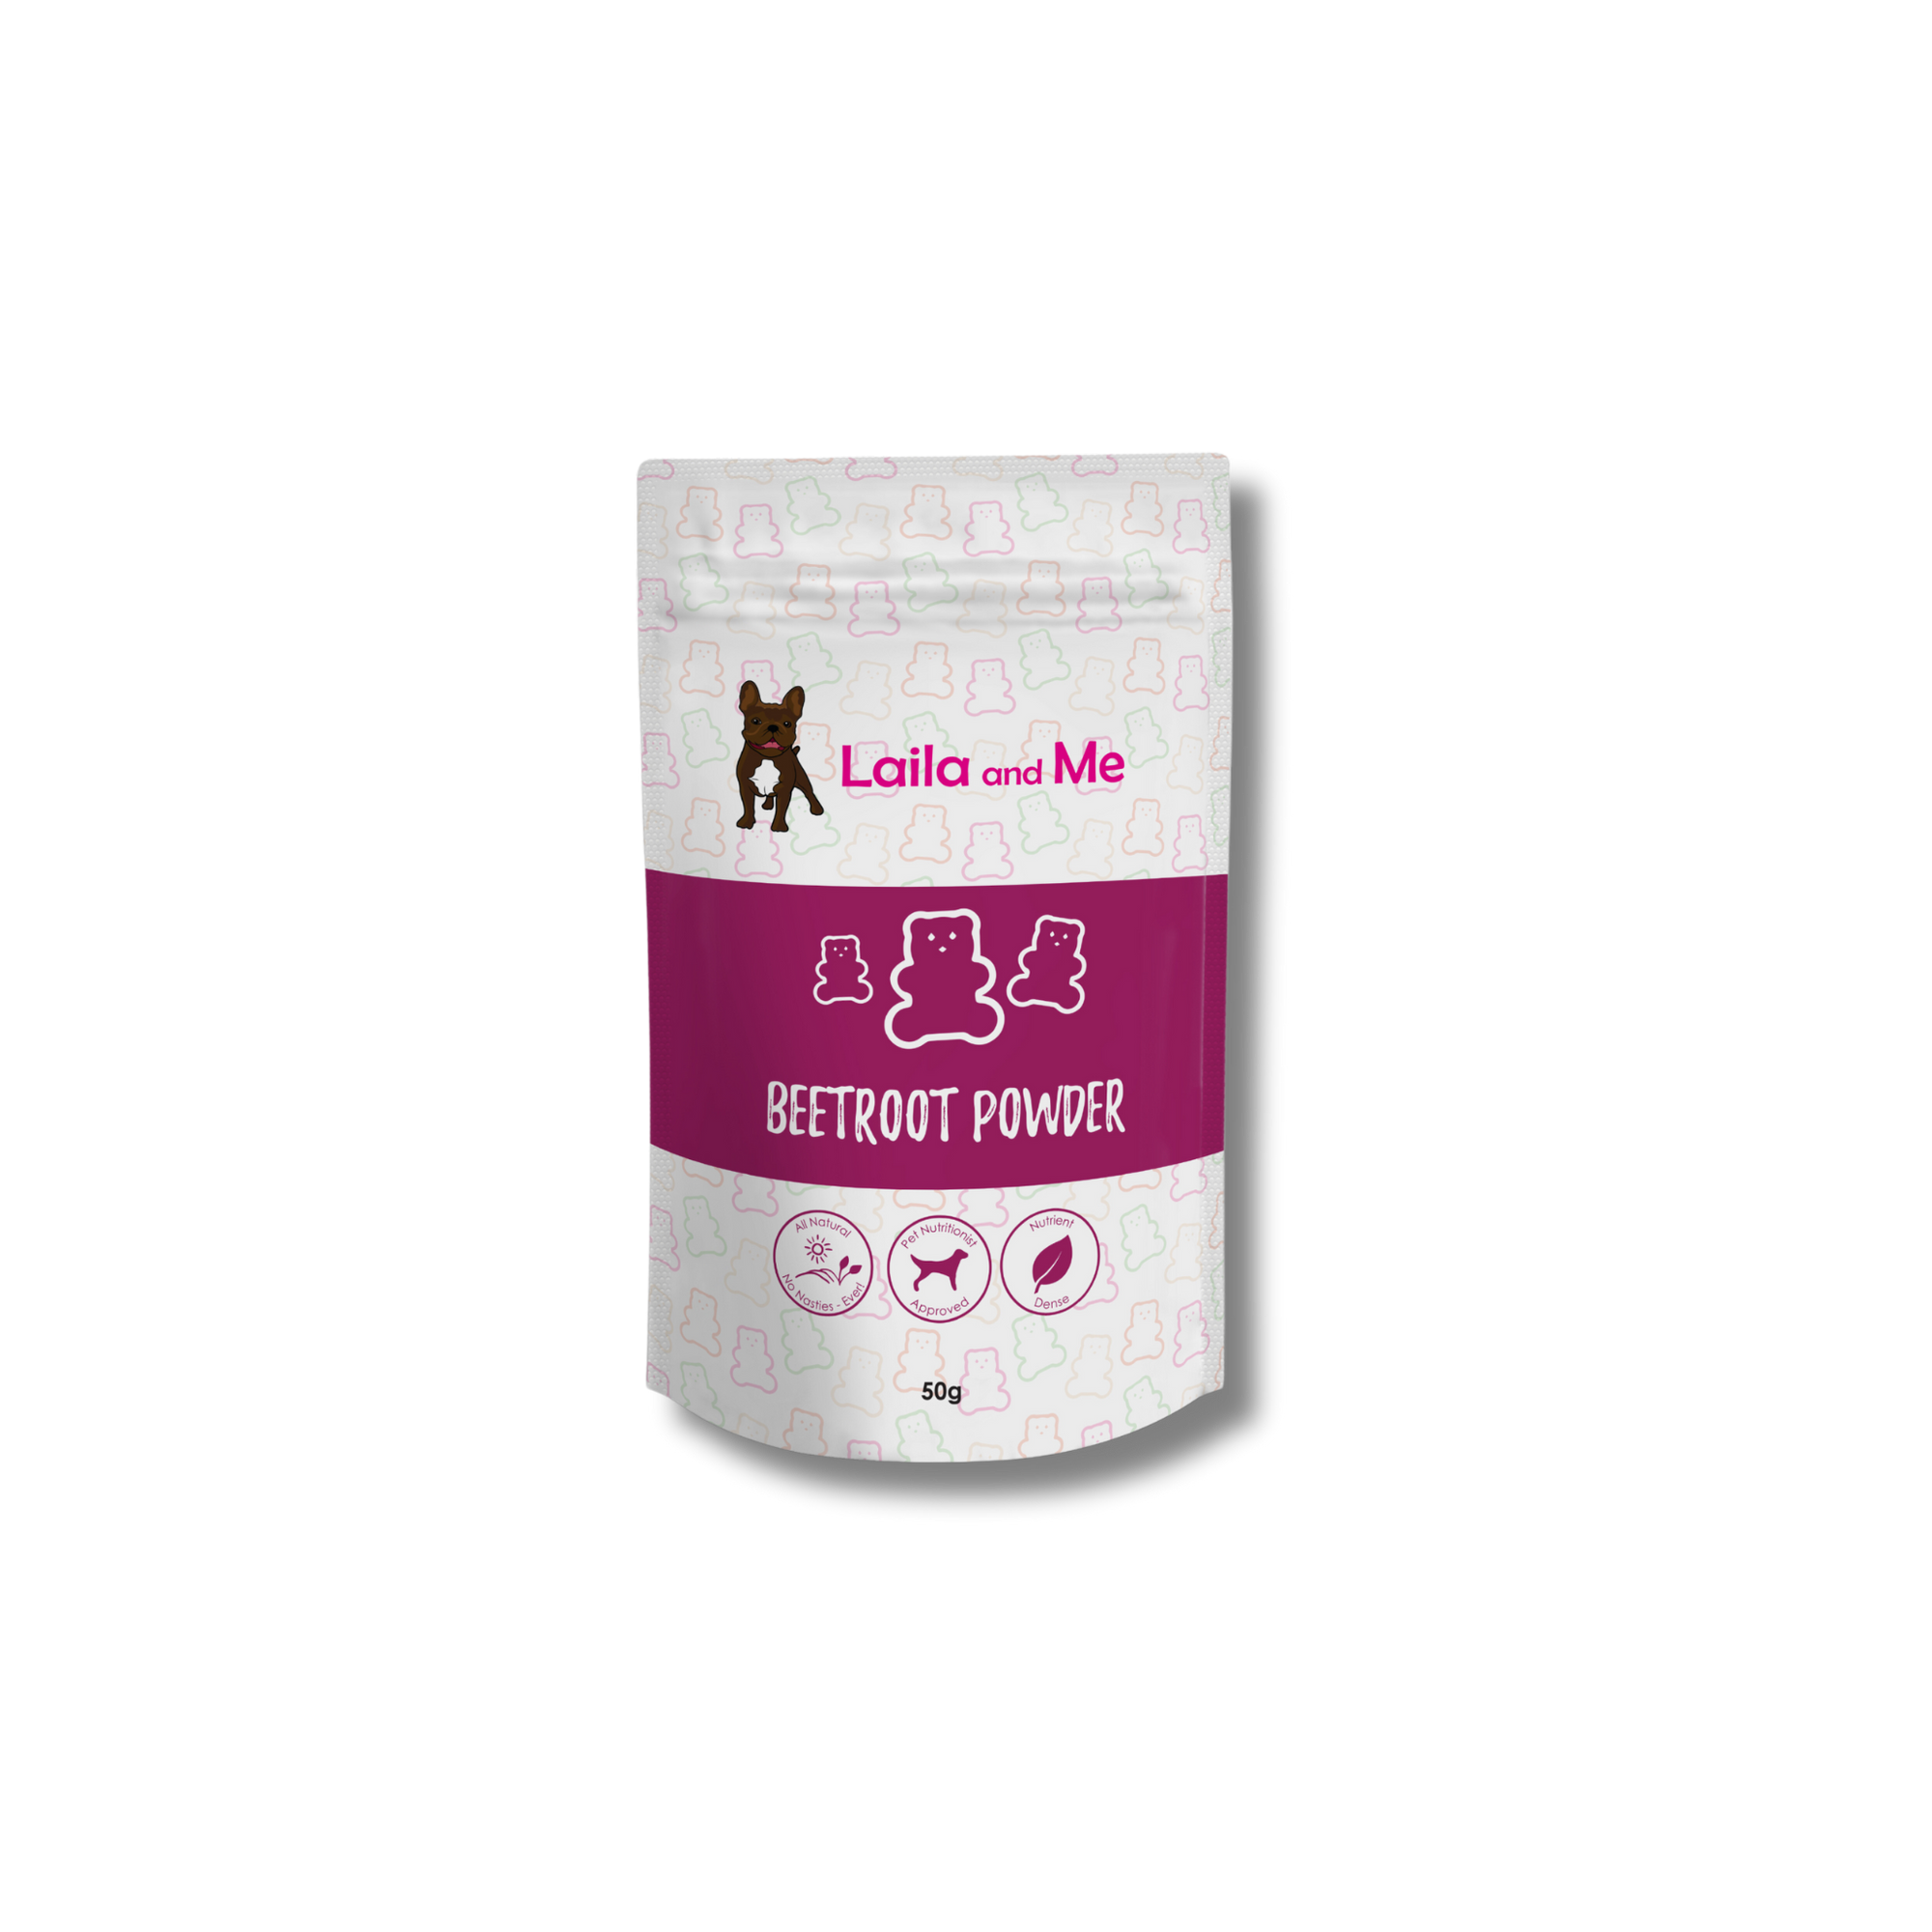 Beetroot Powder for Dog - Laila and Me